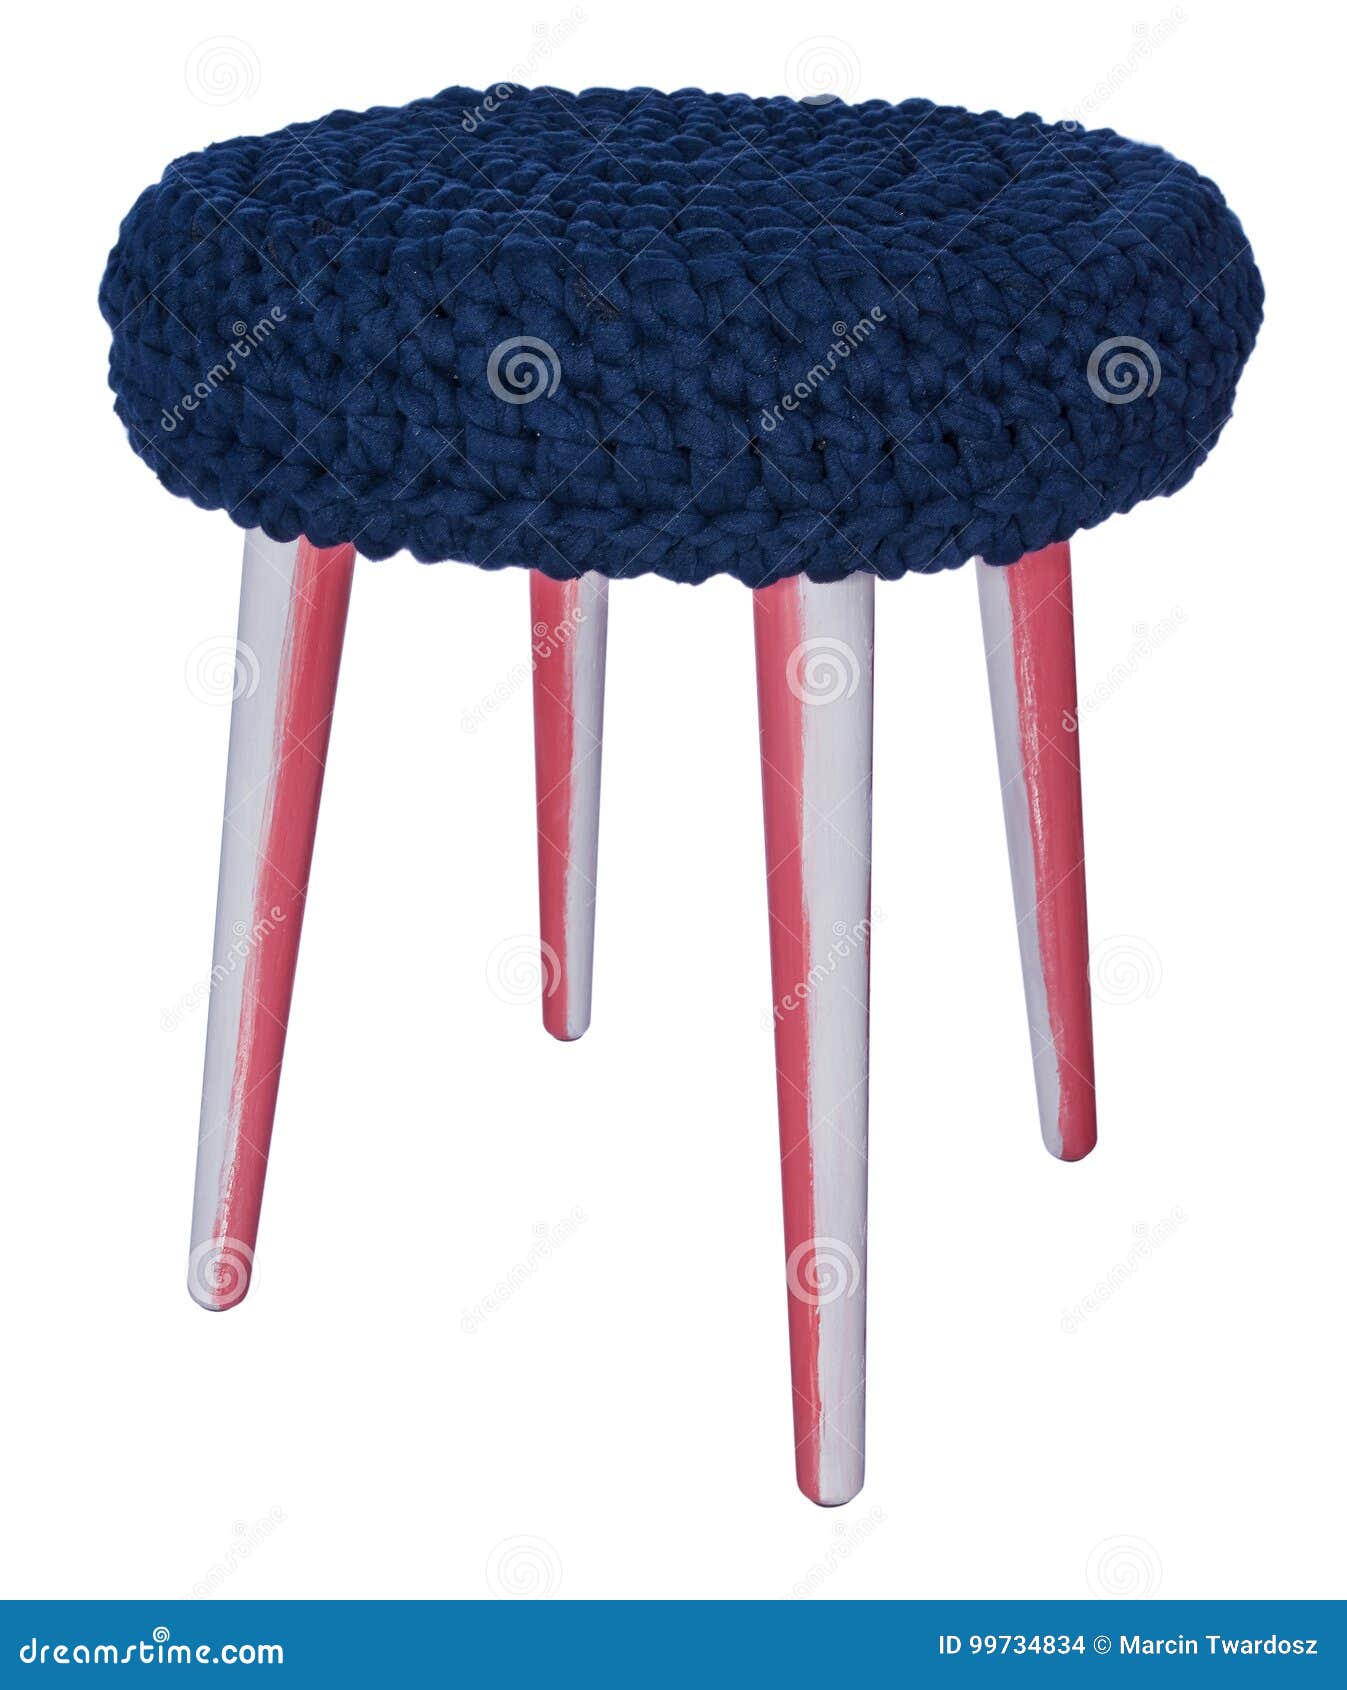 Handmade Stool Pink White Patterns Round Seat In Blue Material